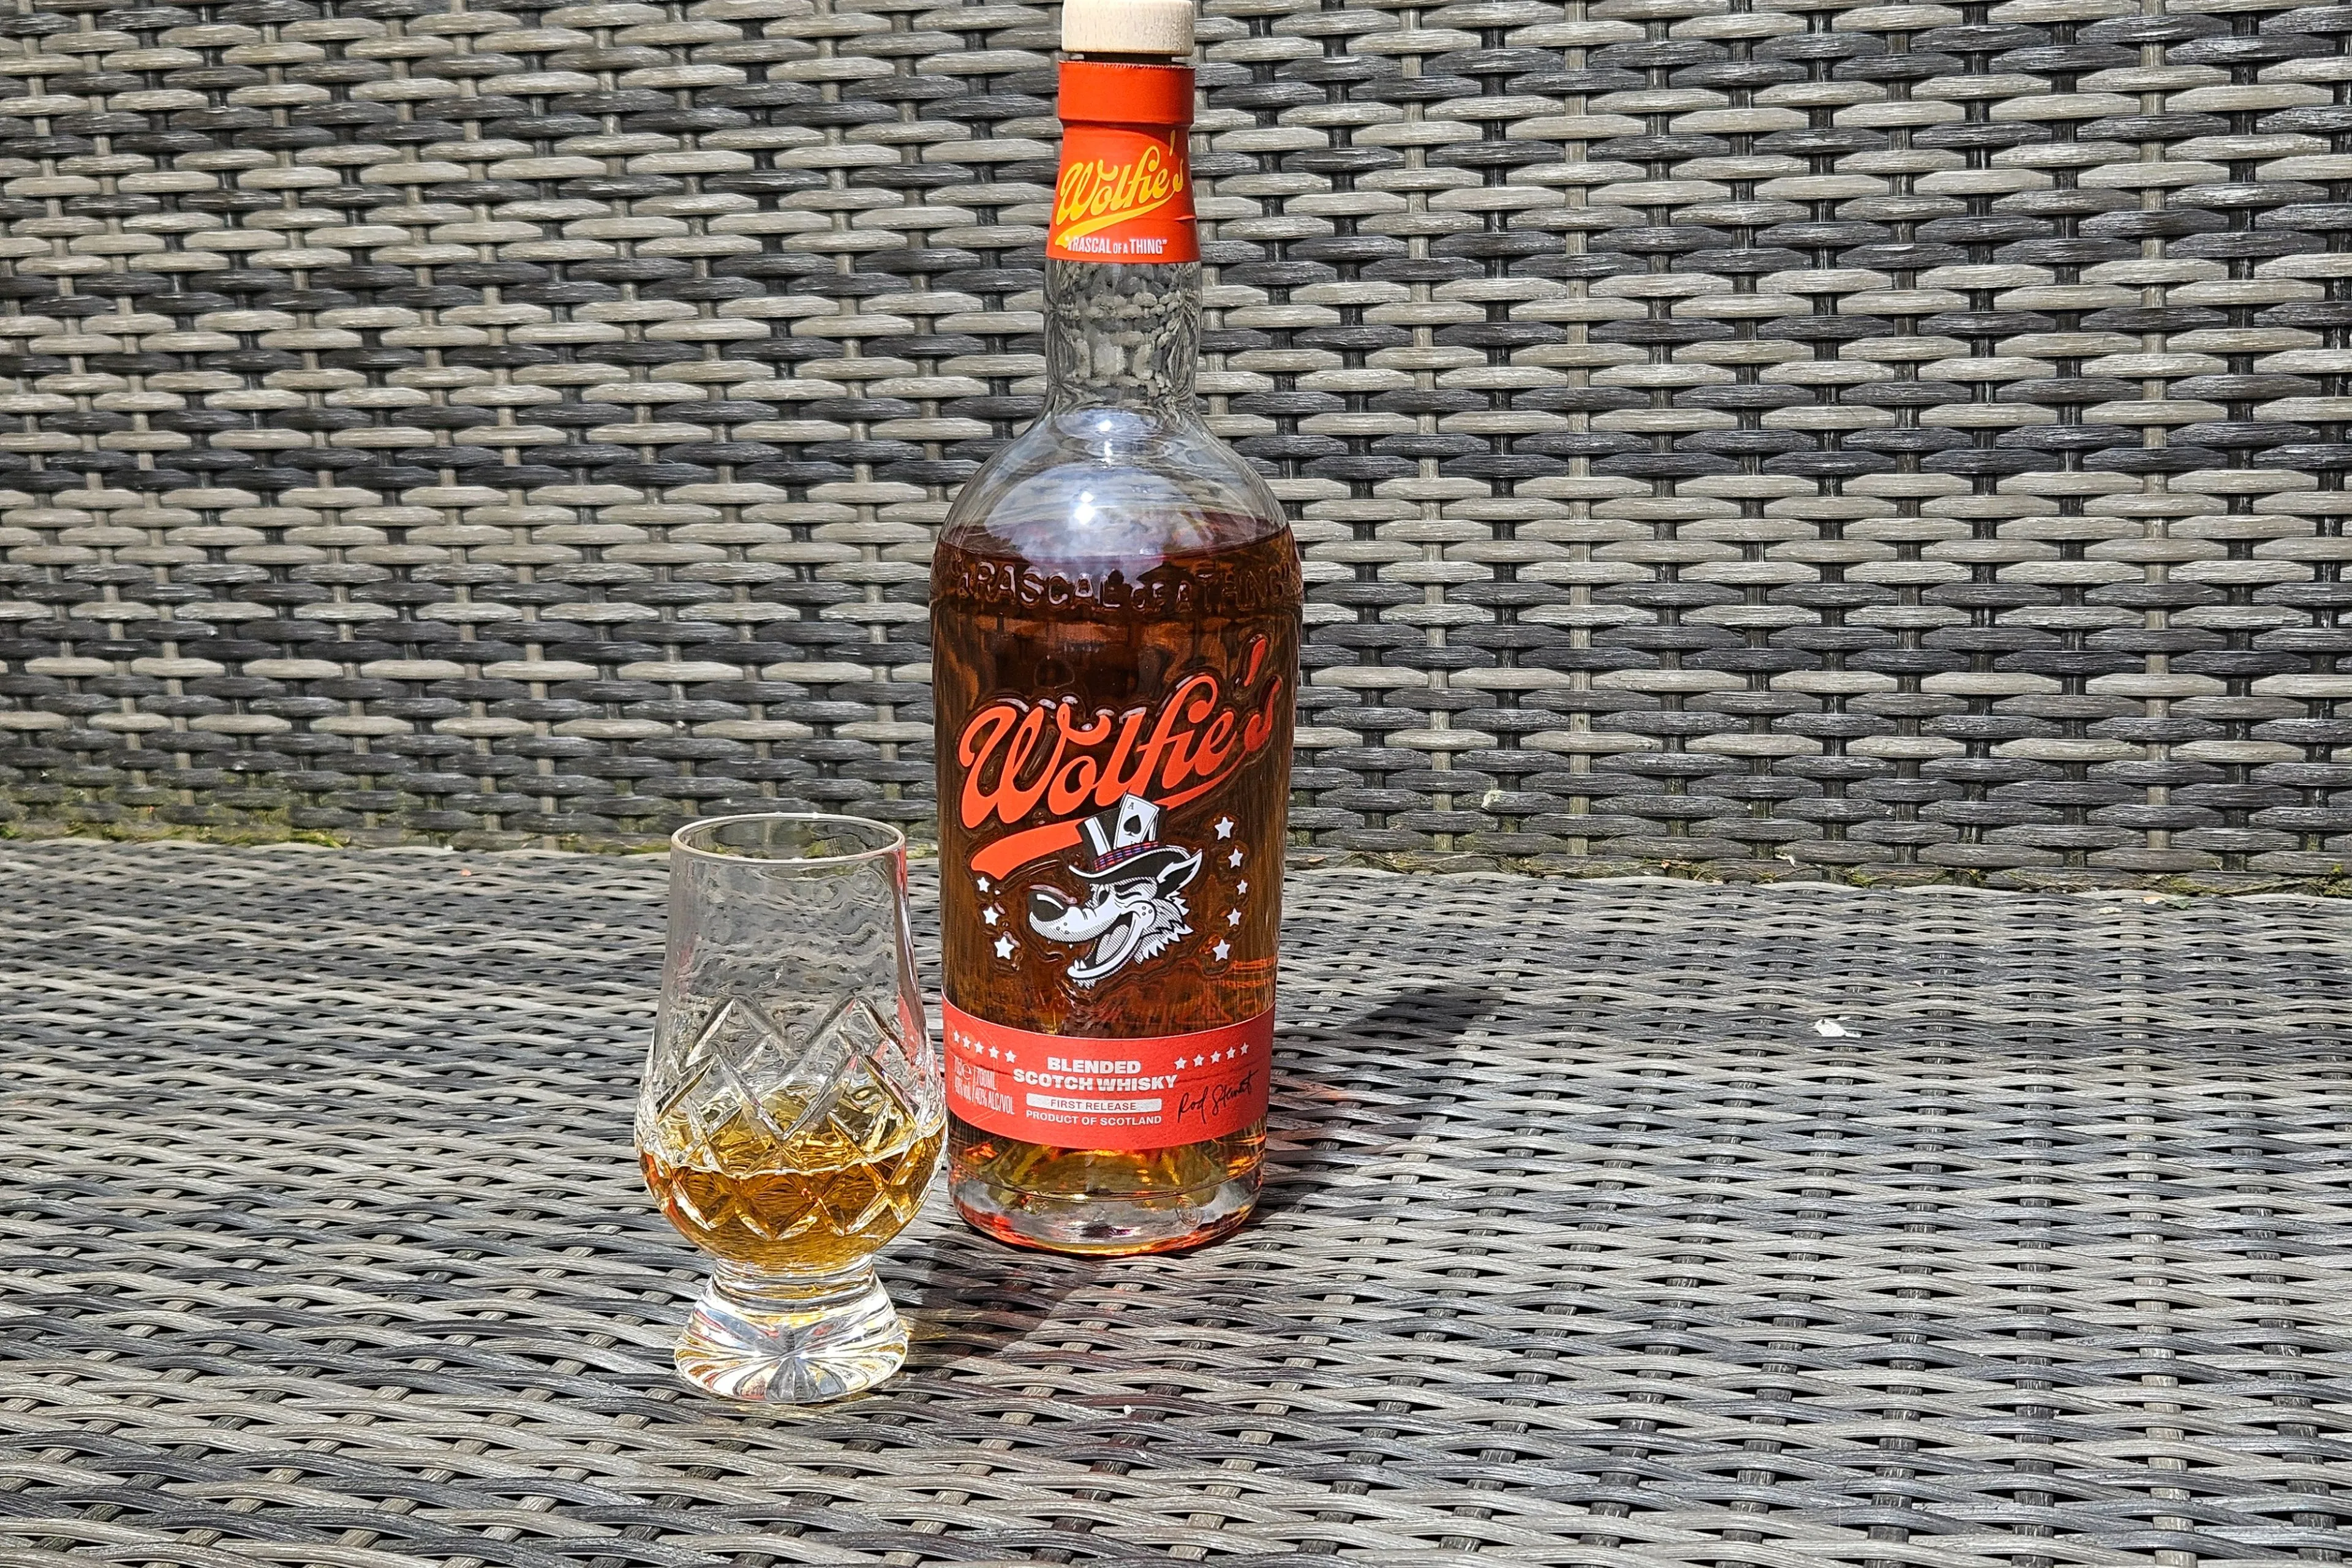 wolfies blended scotch